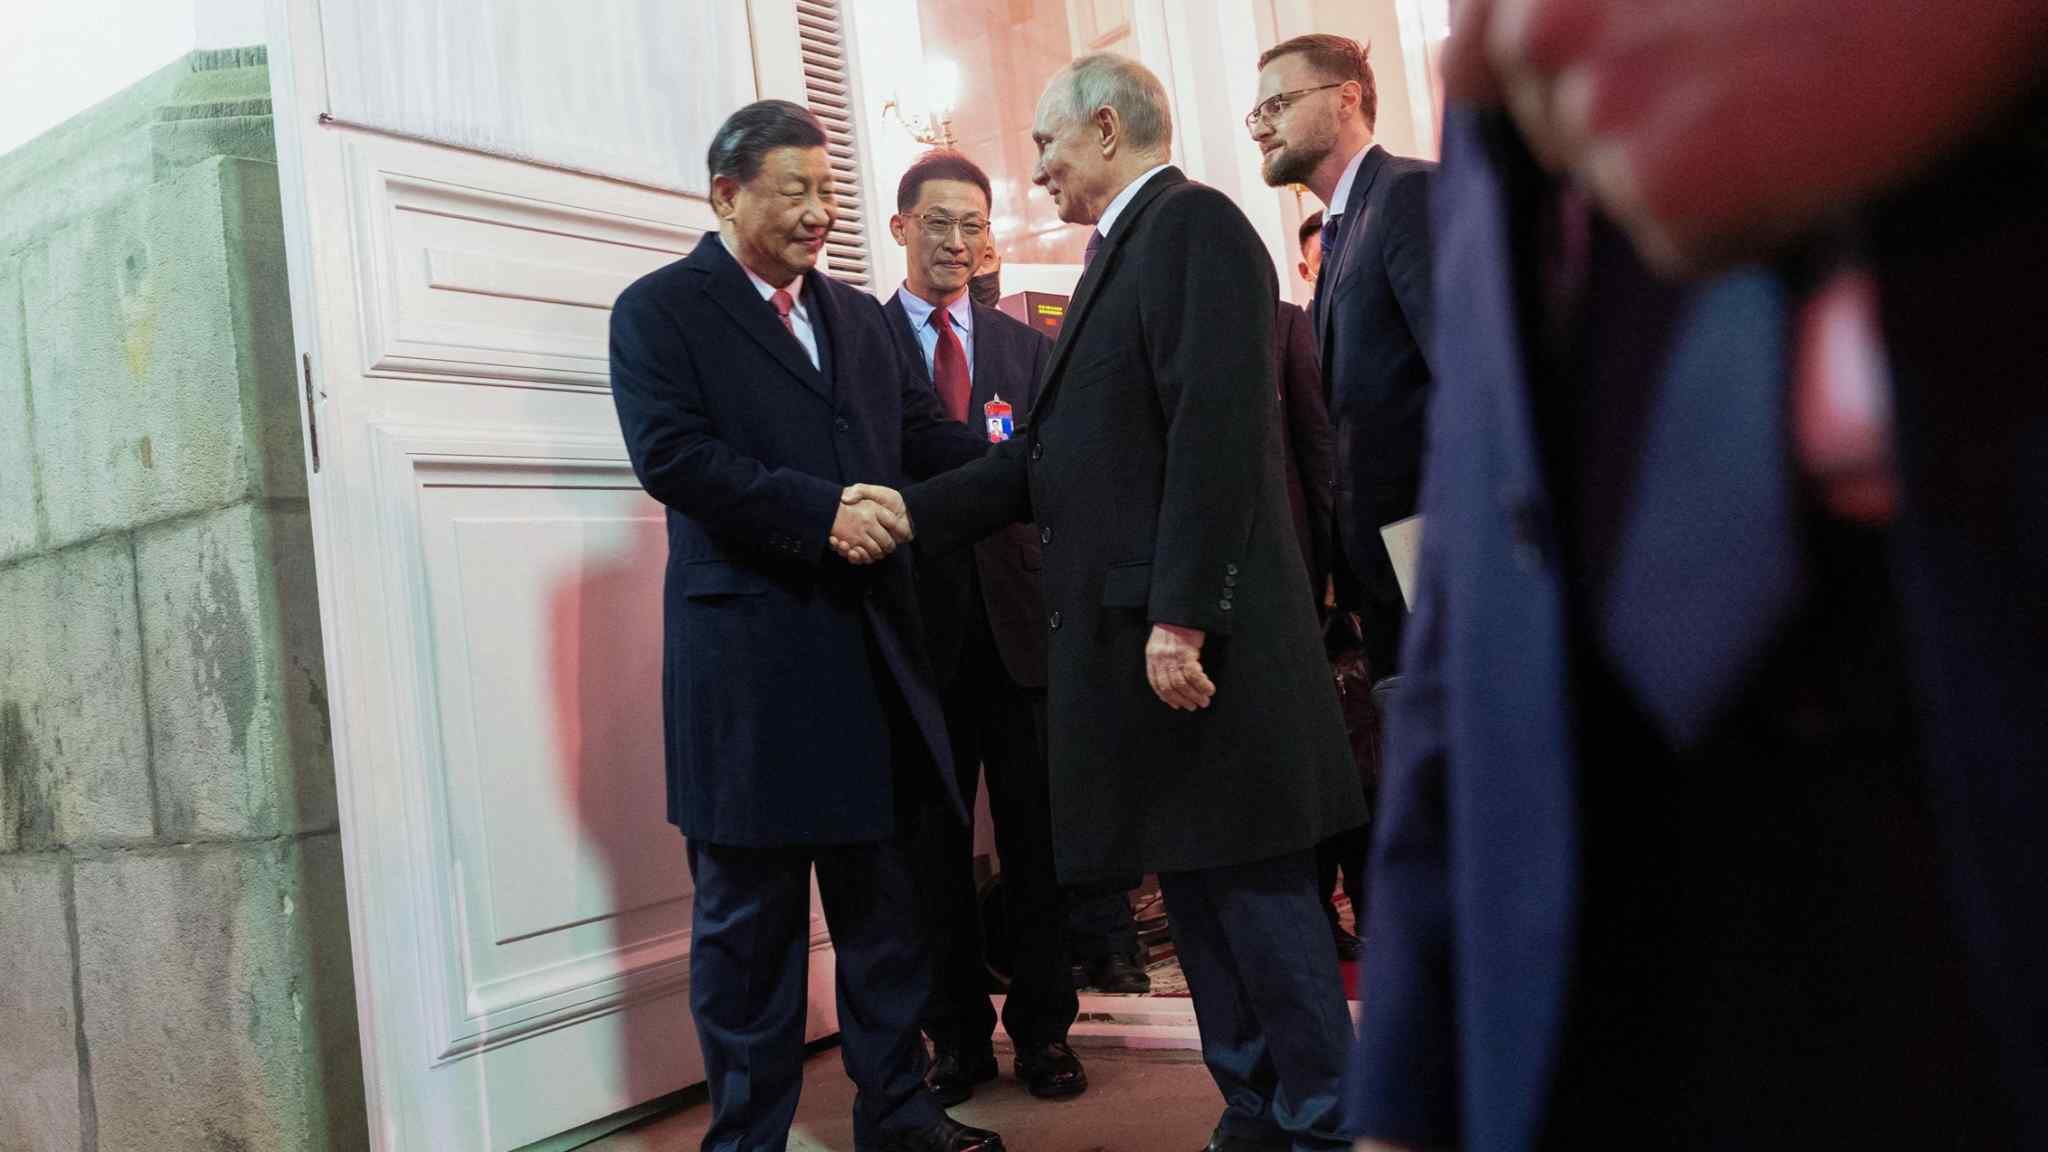 China is tightening its embrace with Russia as it builds bulwarks against the west